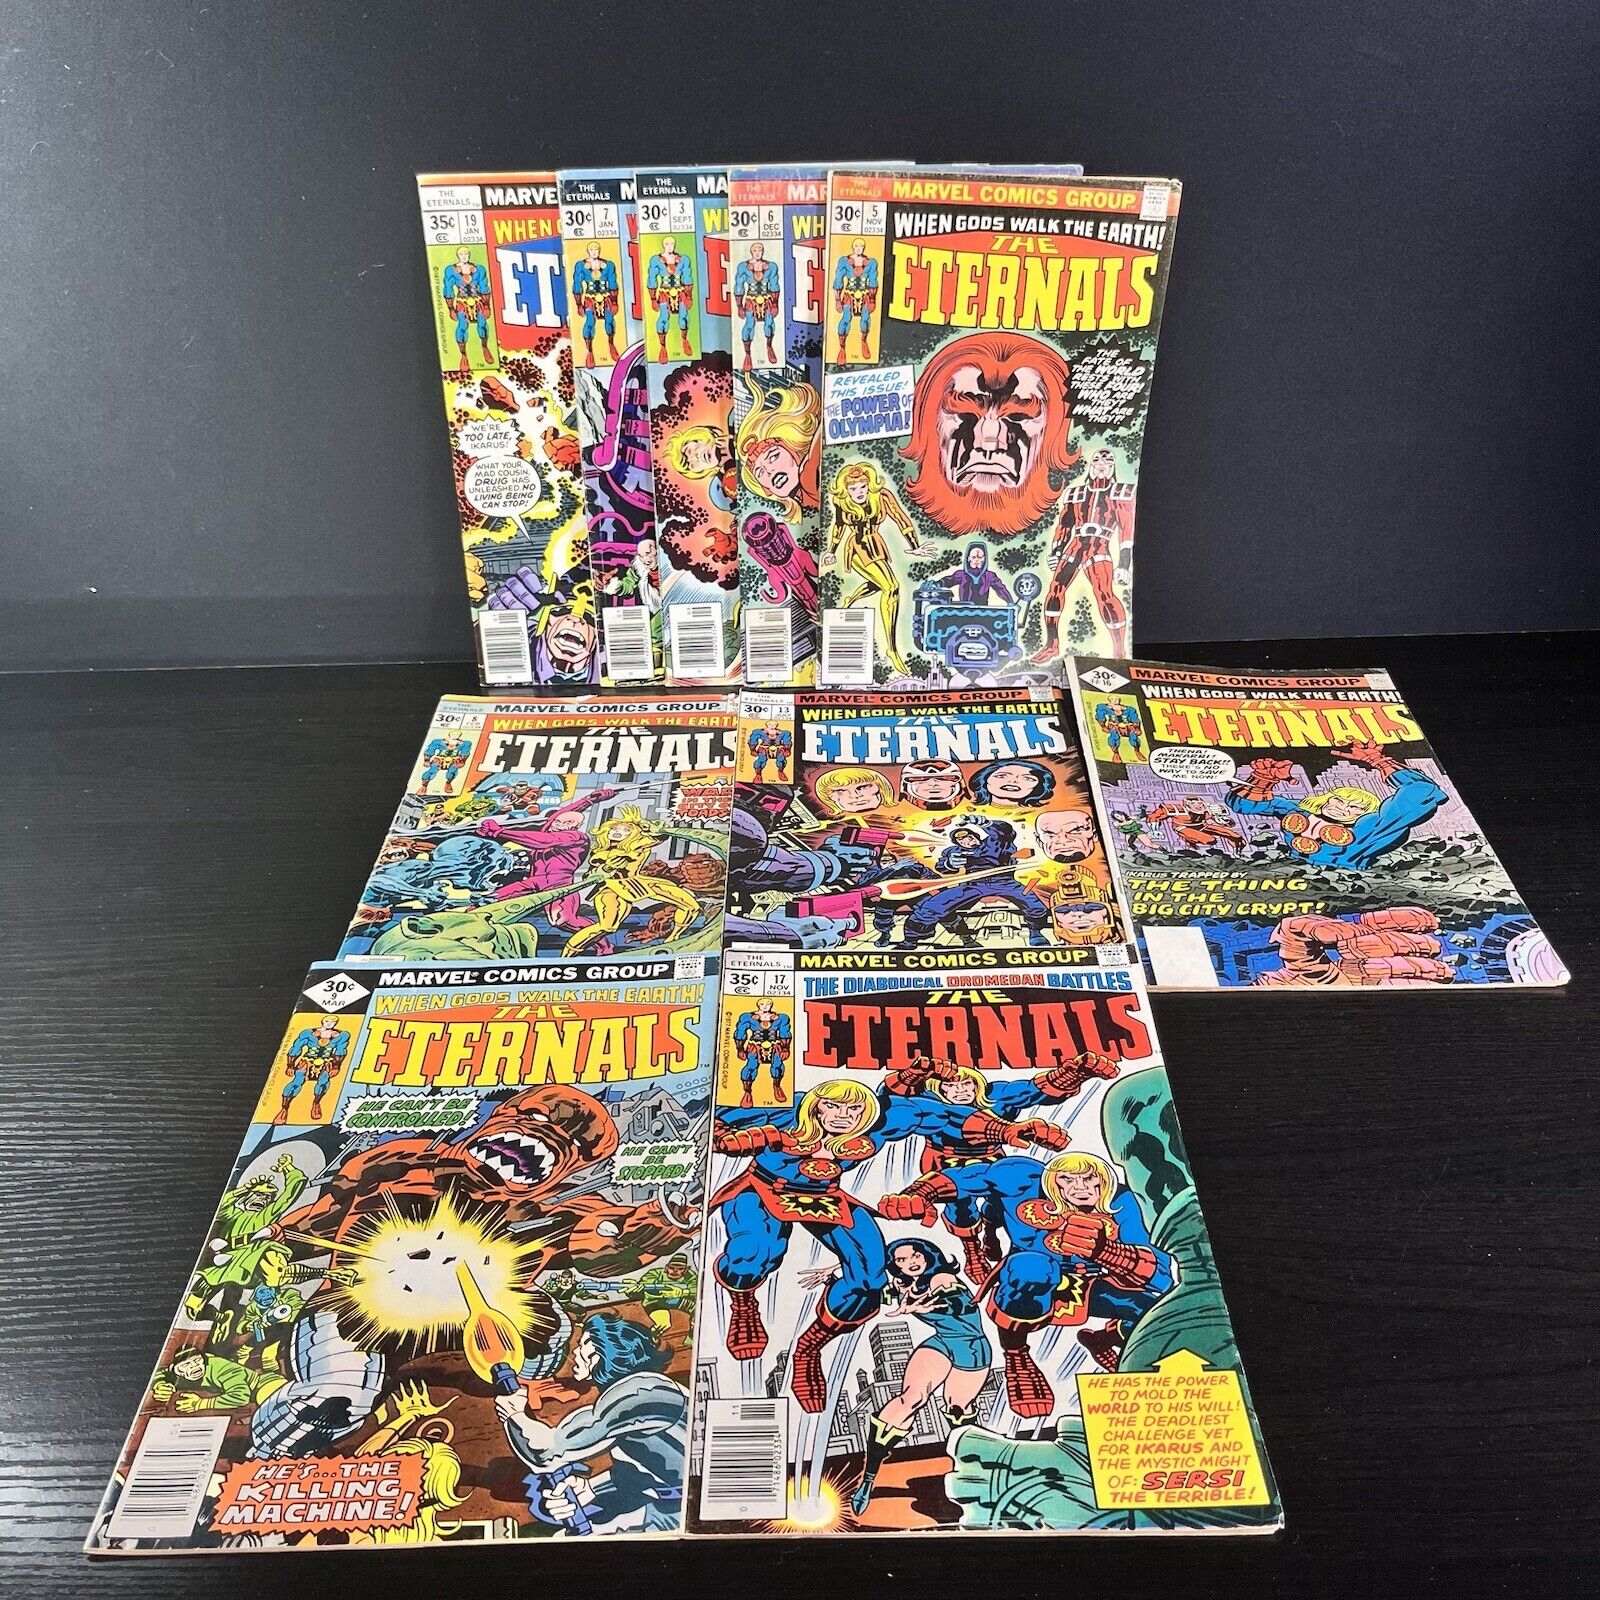 Jack Kirby ETERNALS Comic Book Lot  Very Good Condition Marvel Comics Group 1976